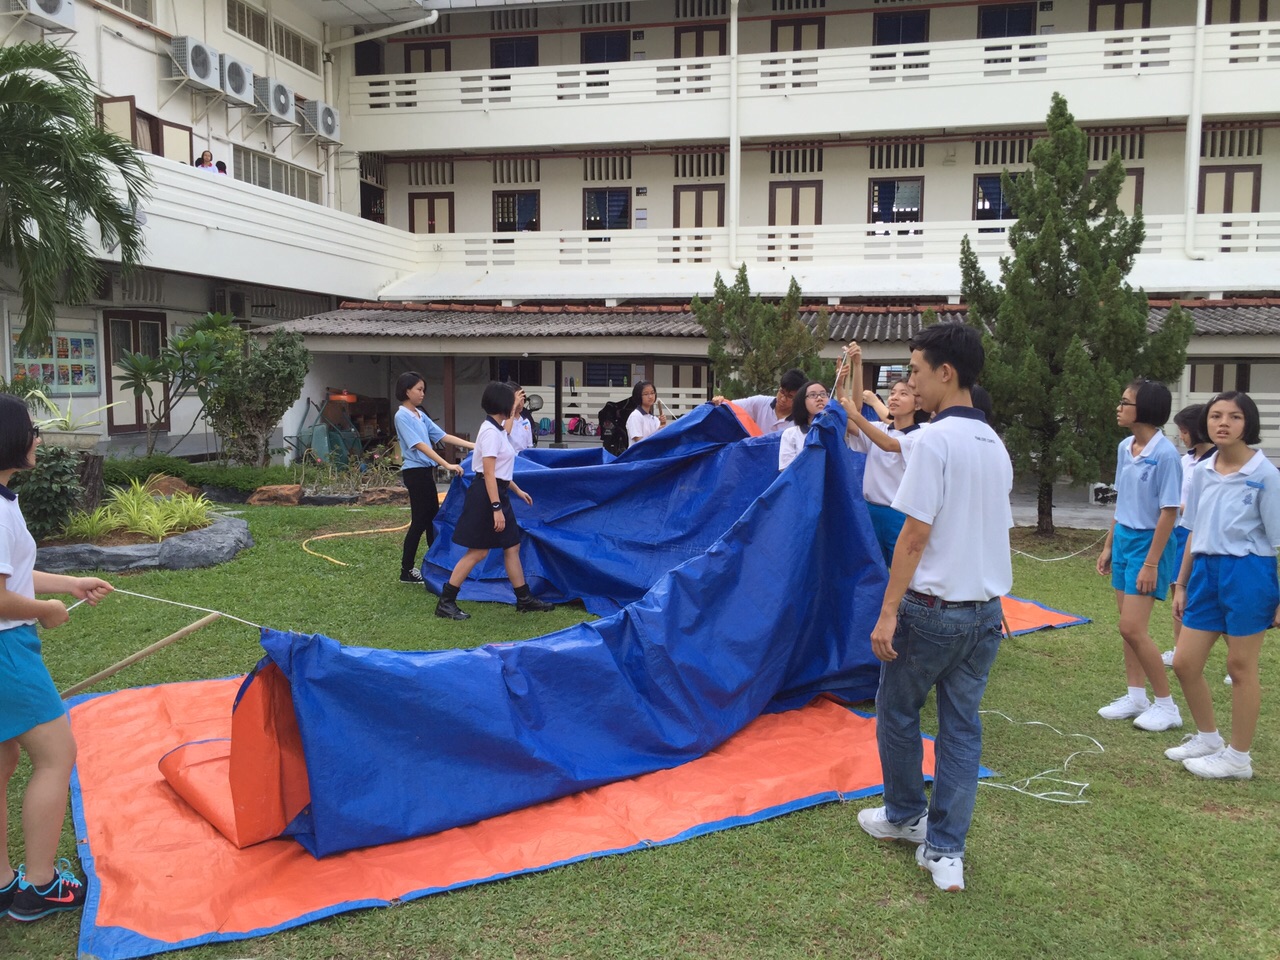 Members were also taught how to set up a tent.